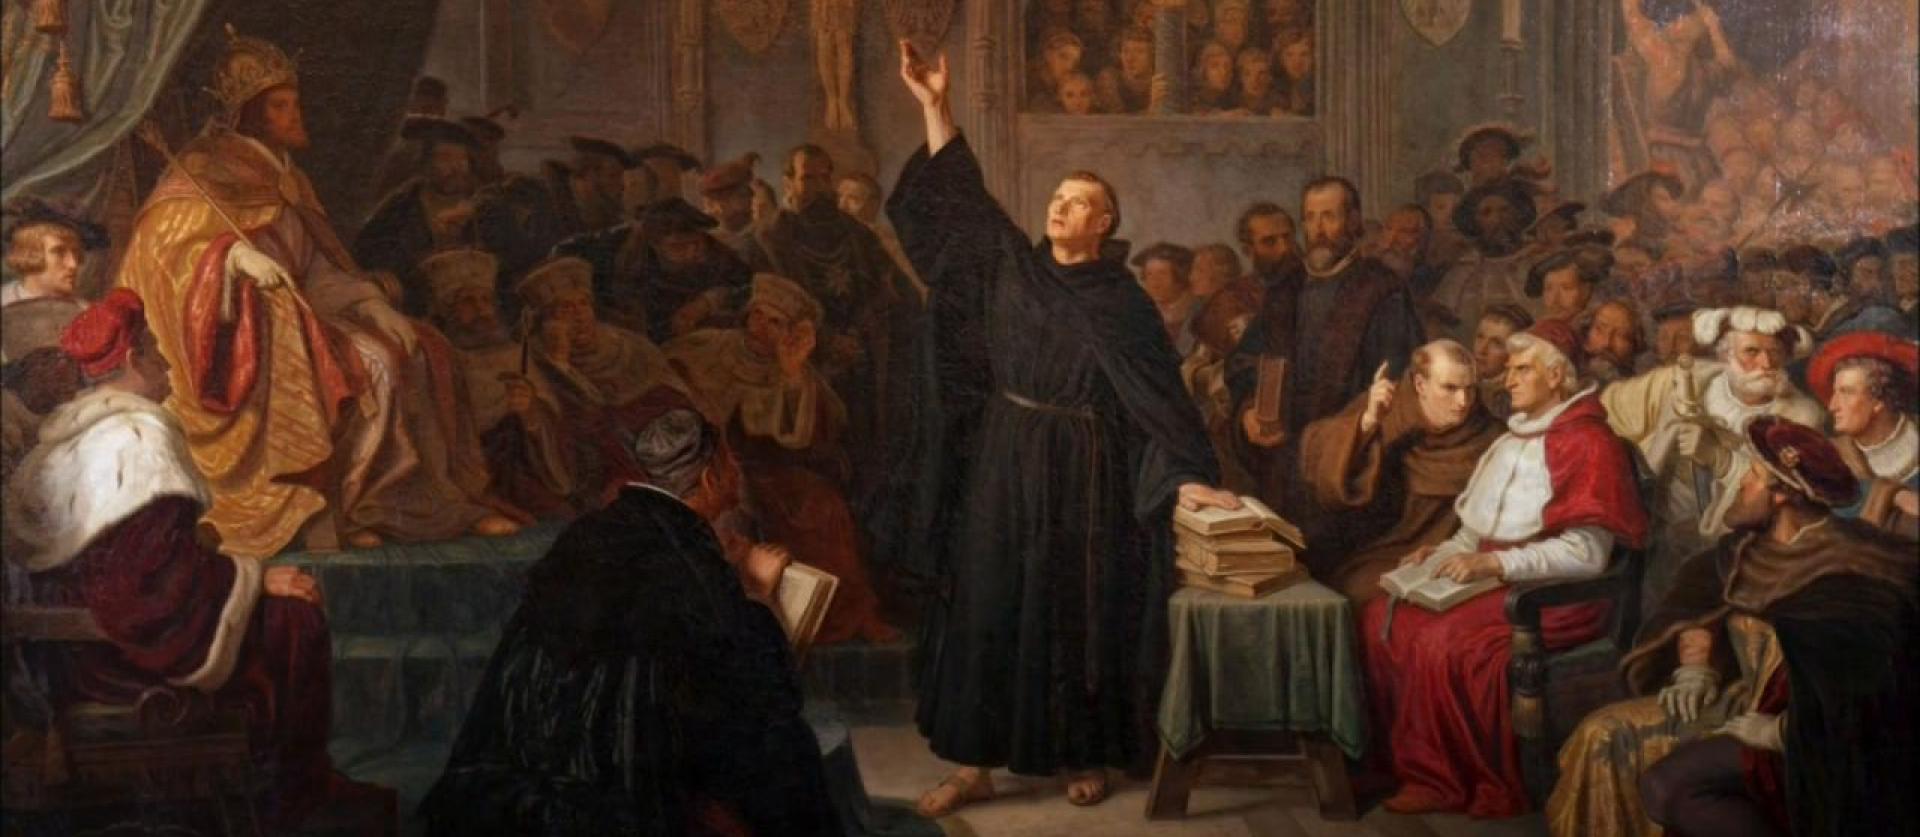 A look at Protestant Reformation through different lenses Today's